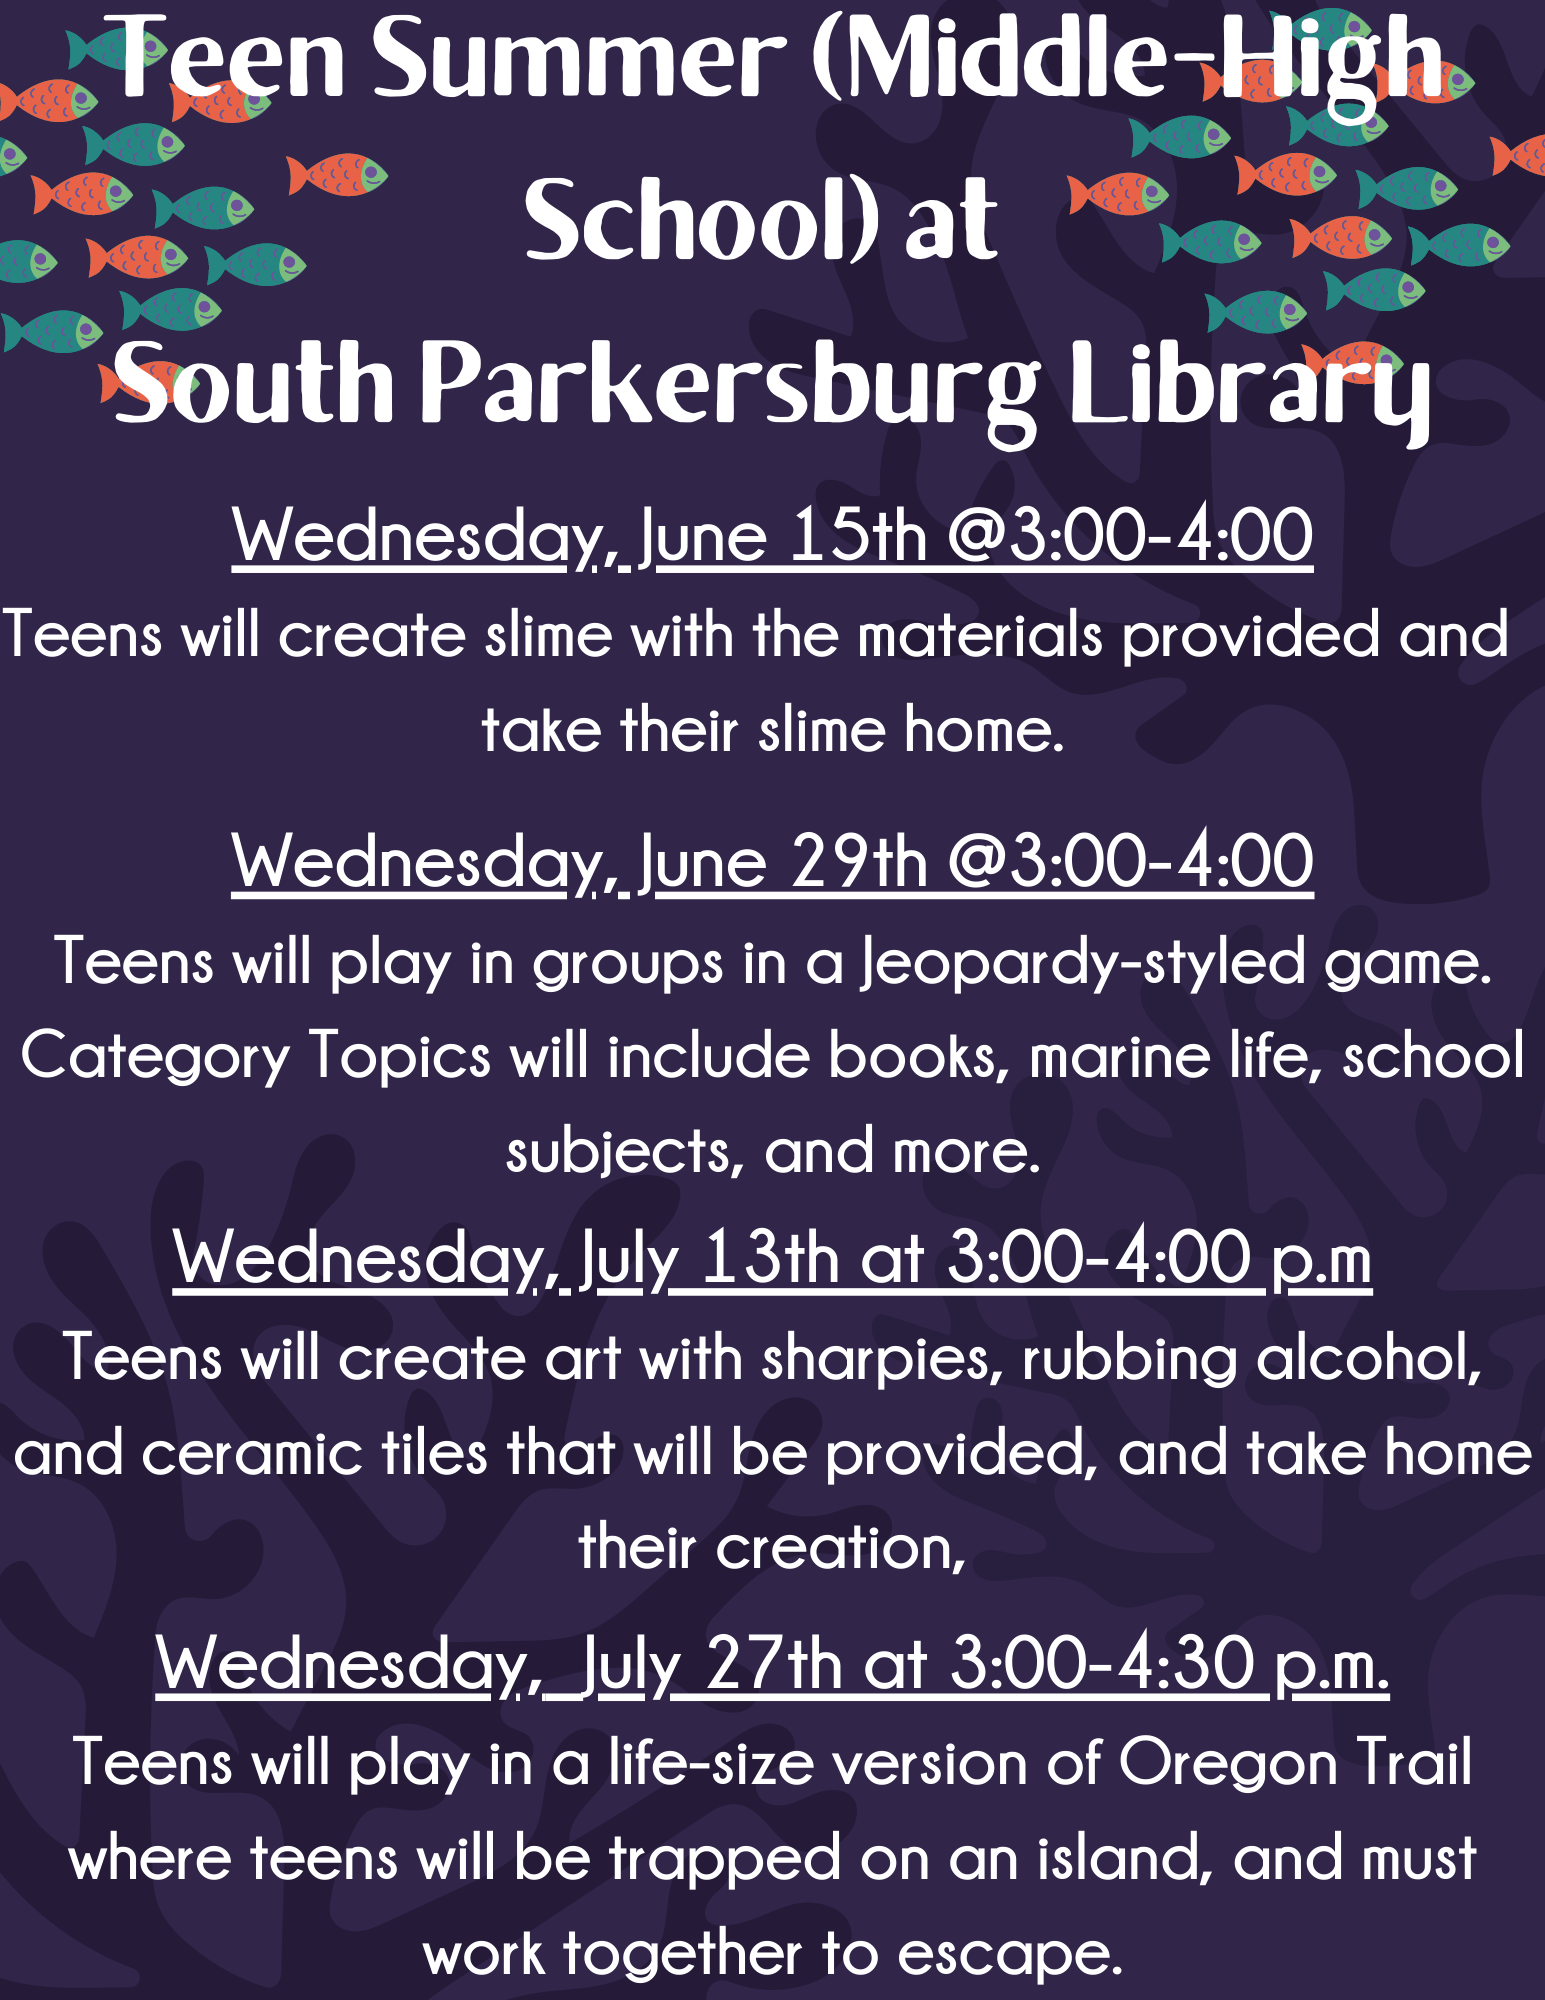 Teen Summer Reading at South Parkersburg Library